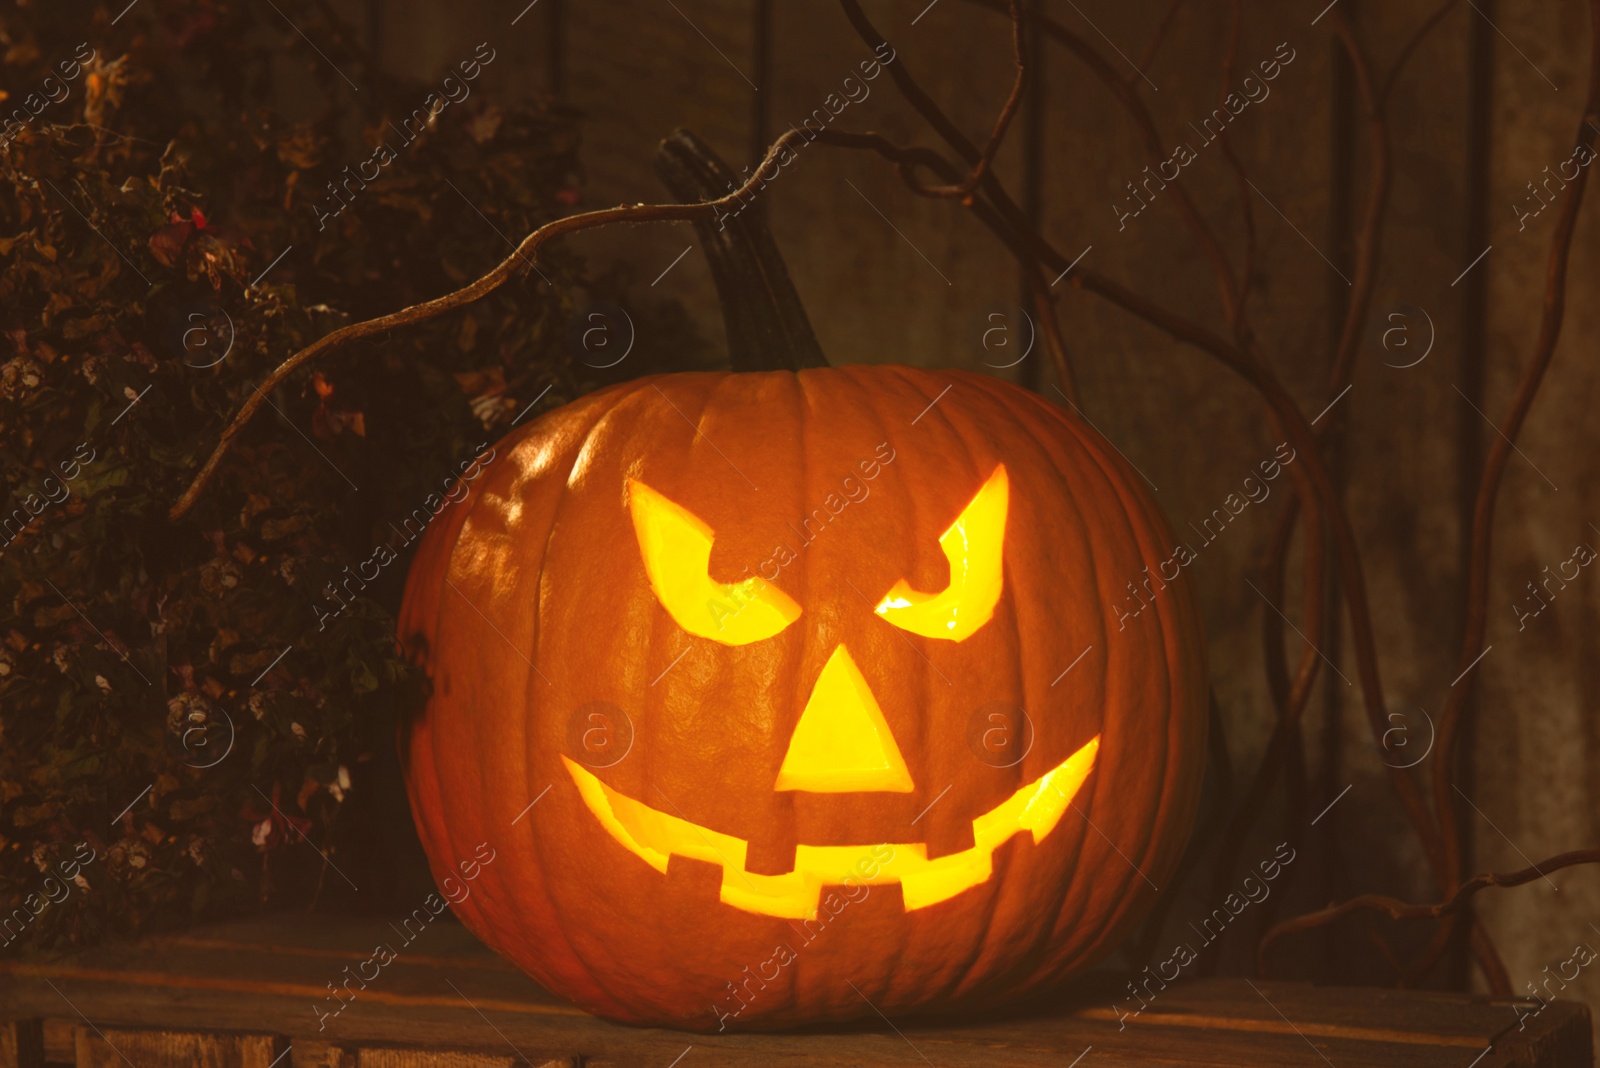 Photo of Scary jack o'lantern pumpkin on wooden bench in darkness. Halloween decor